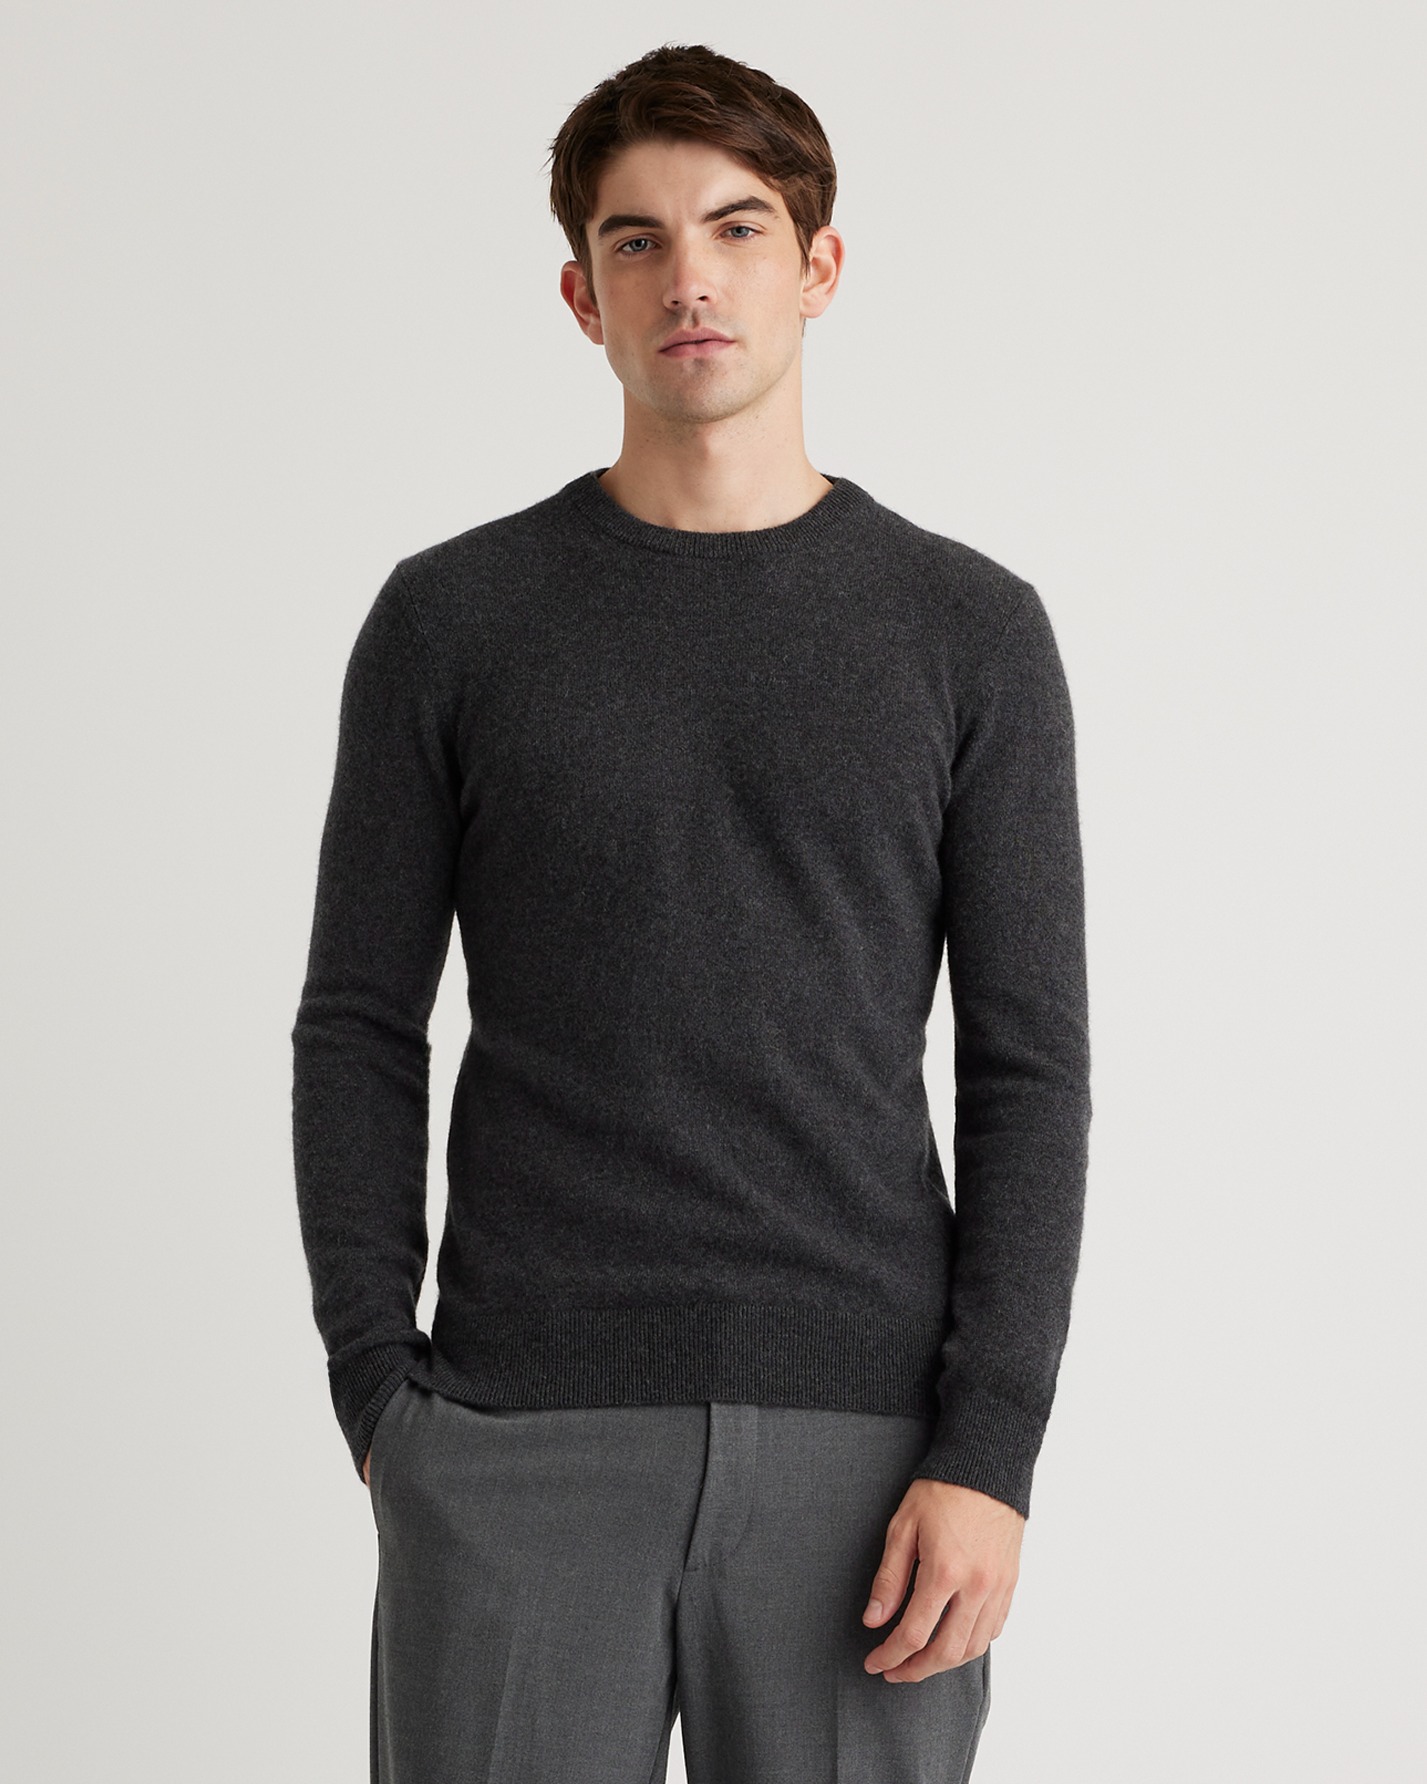 Quince Men's The Cashmere Crewneck Charcoal, 100% Grade A Cashmere Sweater, Size Xxl In Black